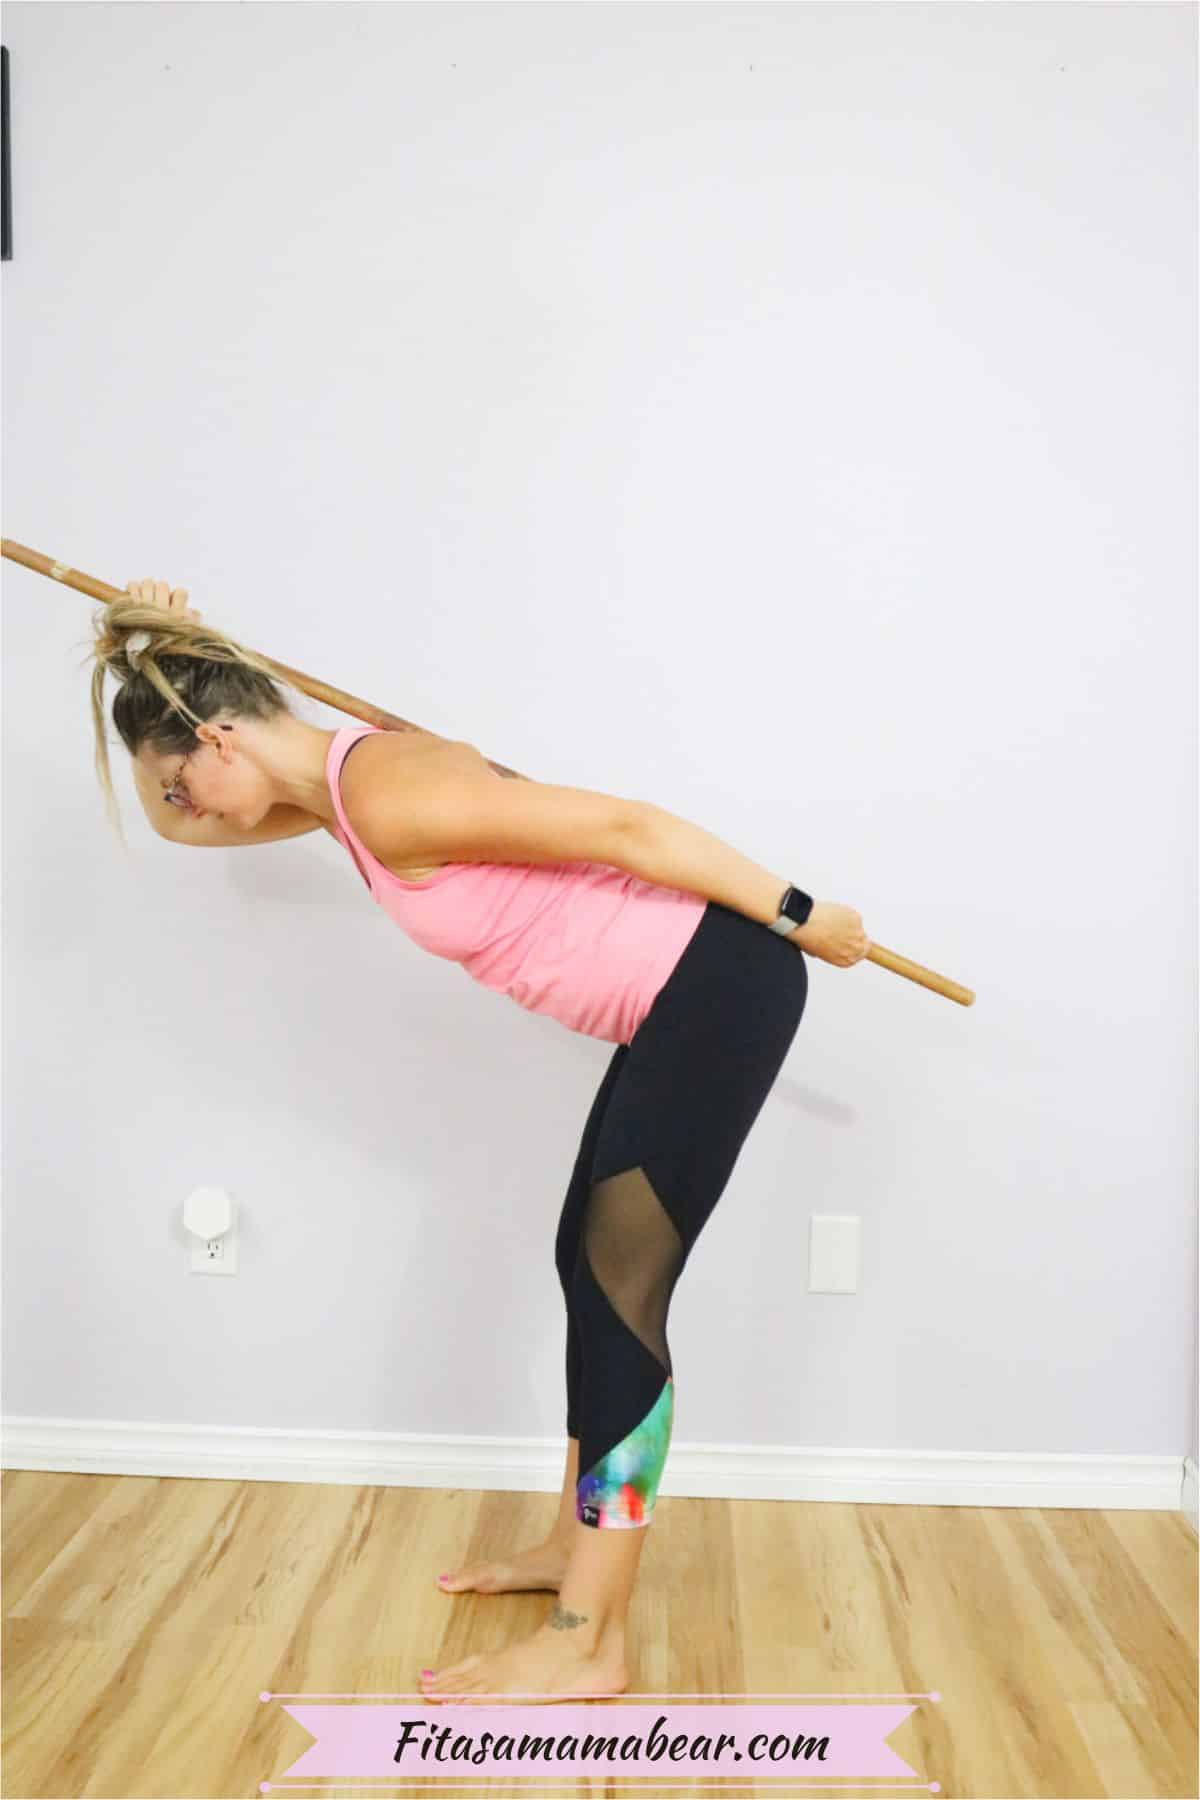 Woman in pink tank top and black pants learn how to perform a hip hinge with a dowel on her back